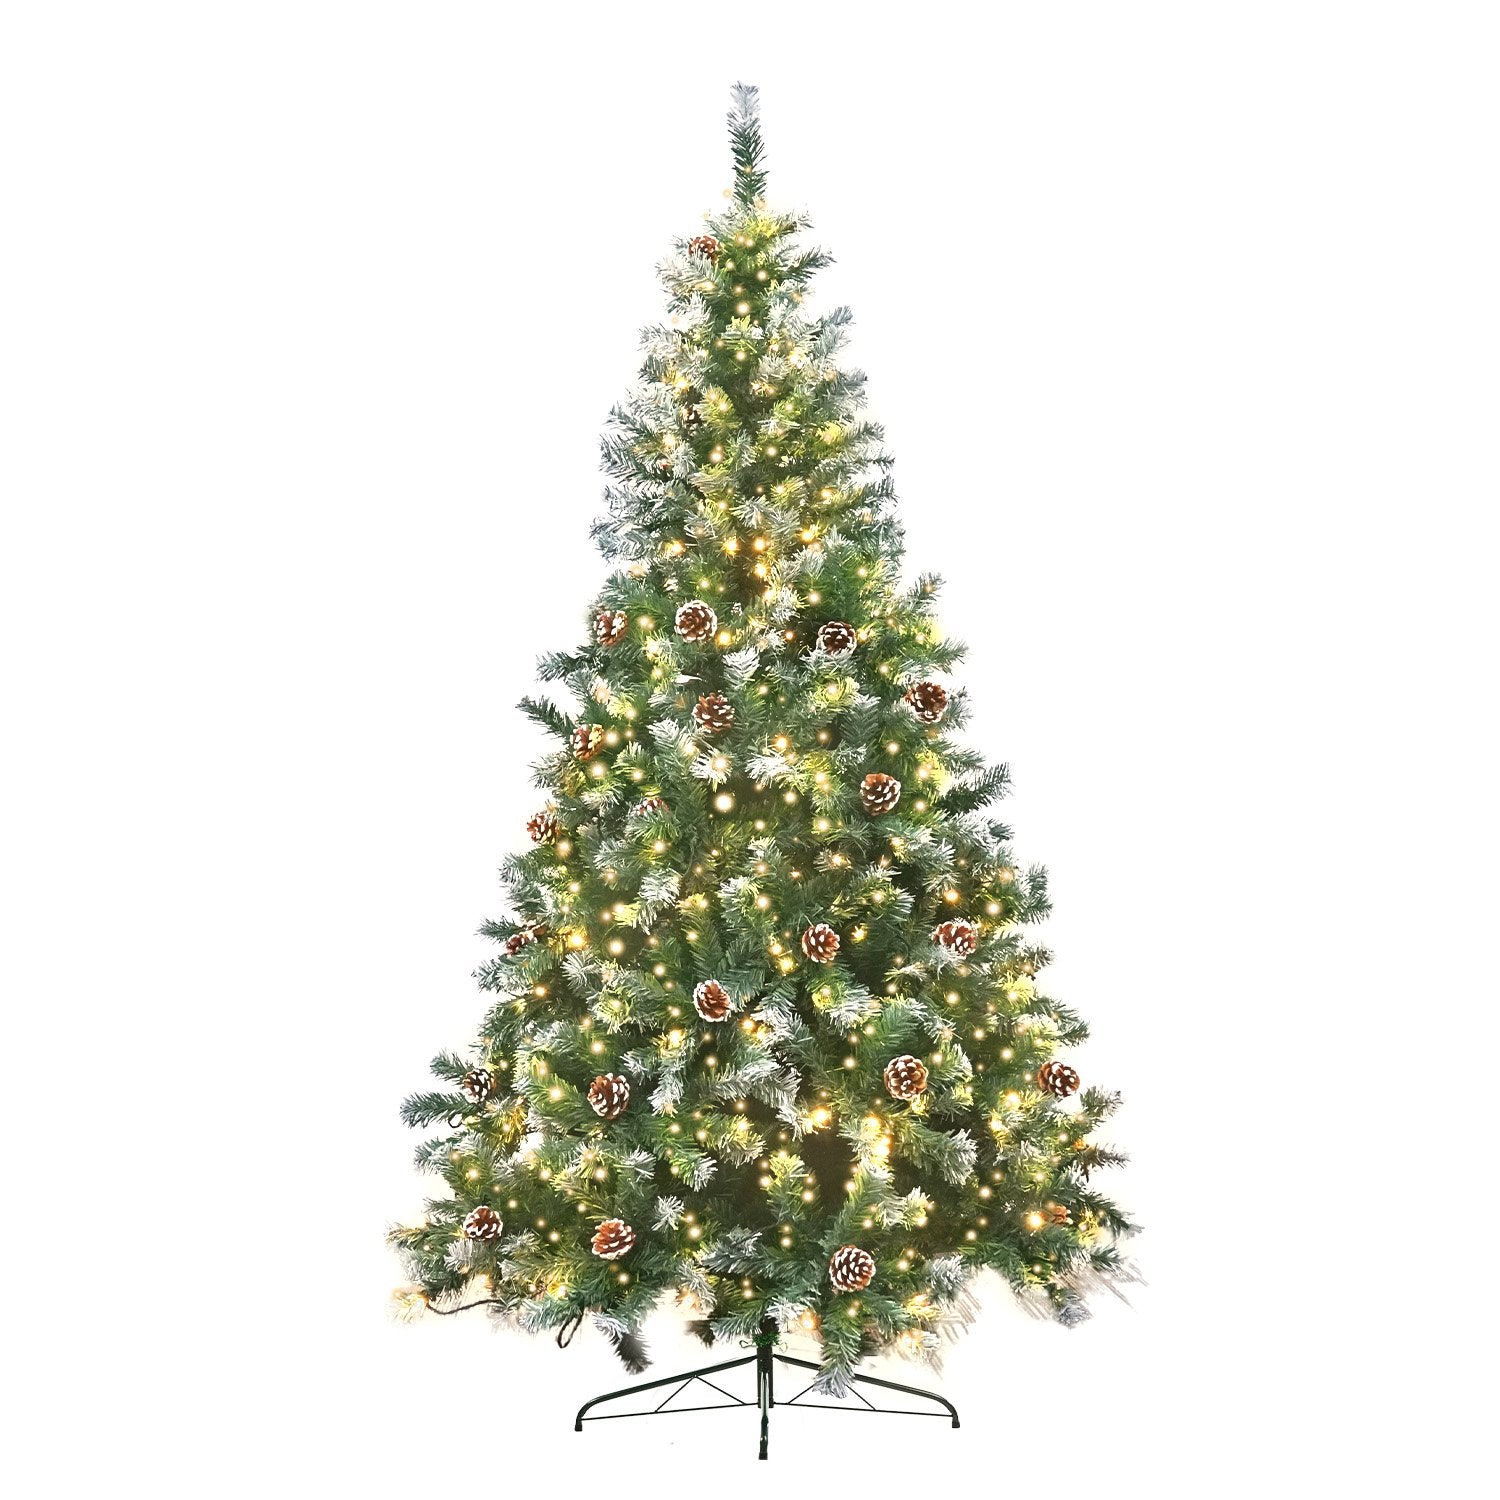 Christabelle 2m Pre Lit LED Christmas Tree Decor with Pine Cones Xmas Decorations